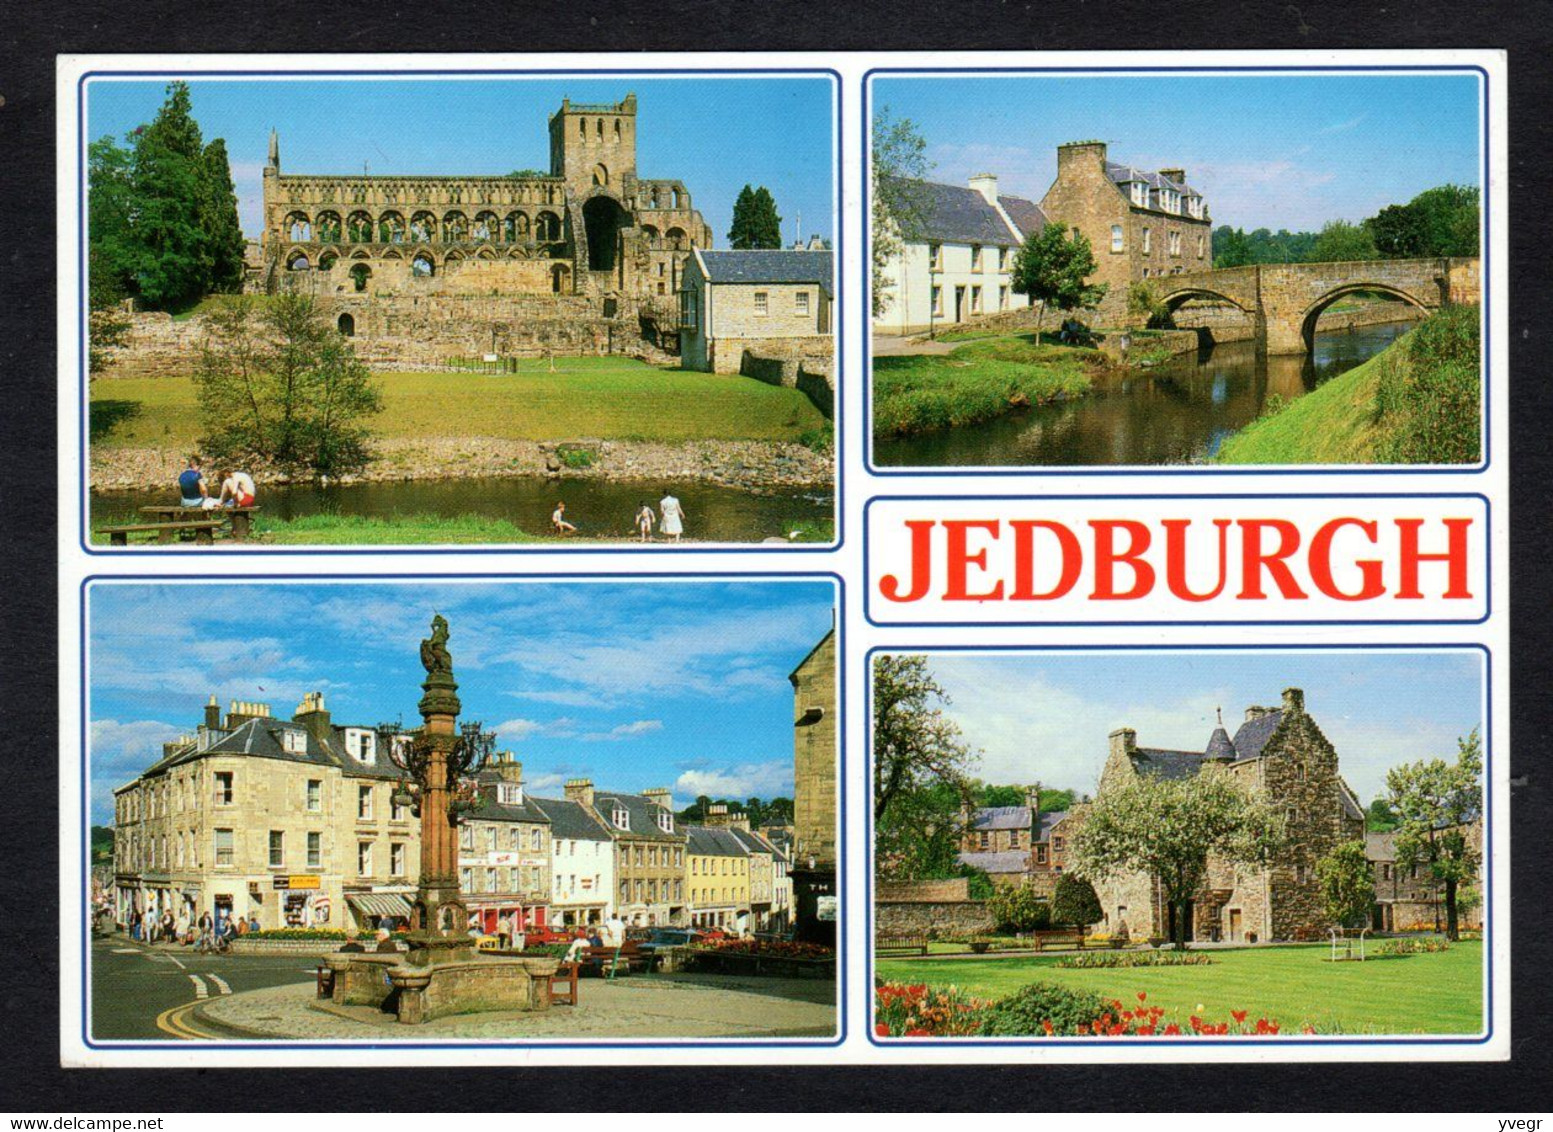 Ecosse - Century JEDBURGH Abbey, The Mercat Cross, Auld Brig And Jed Water, Queen Mary's House - Multi , Vues Diverses - Ross & Cromarty